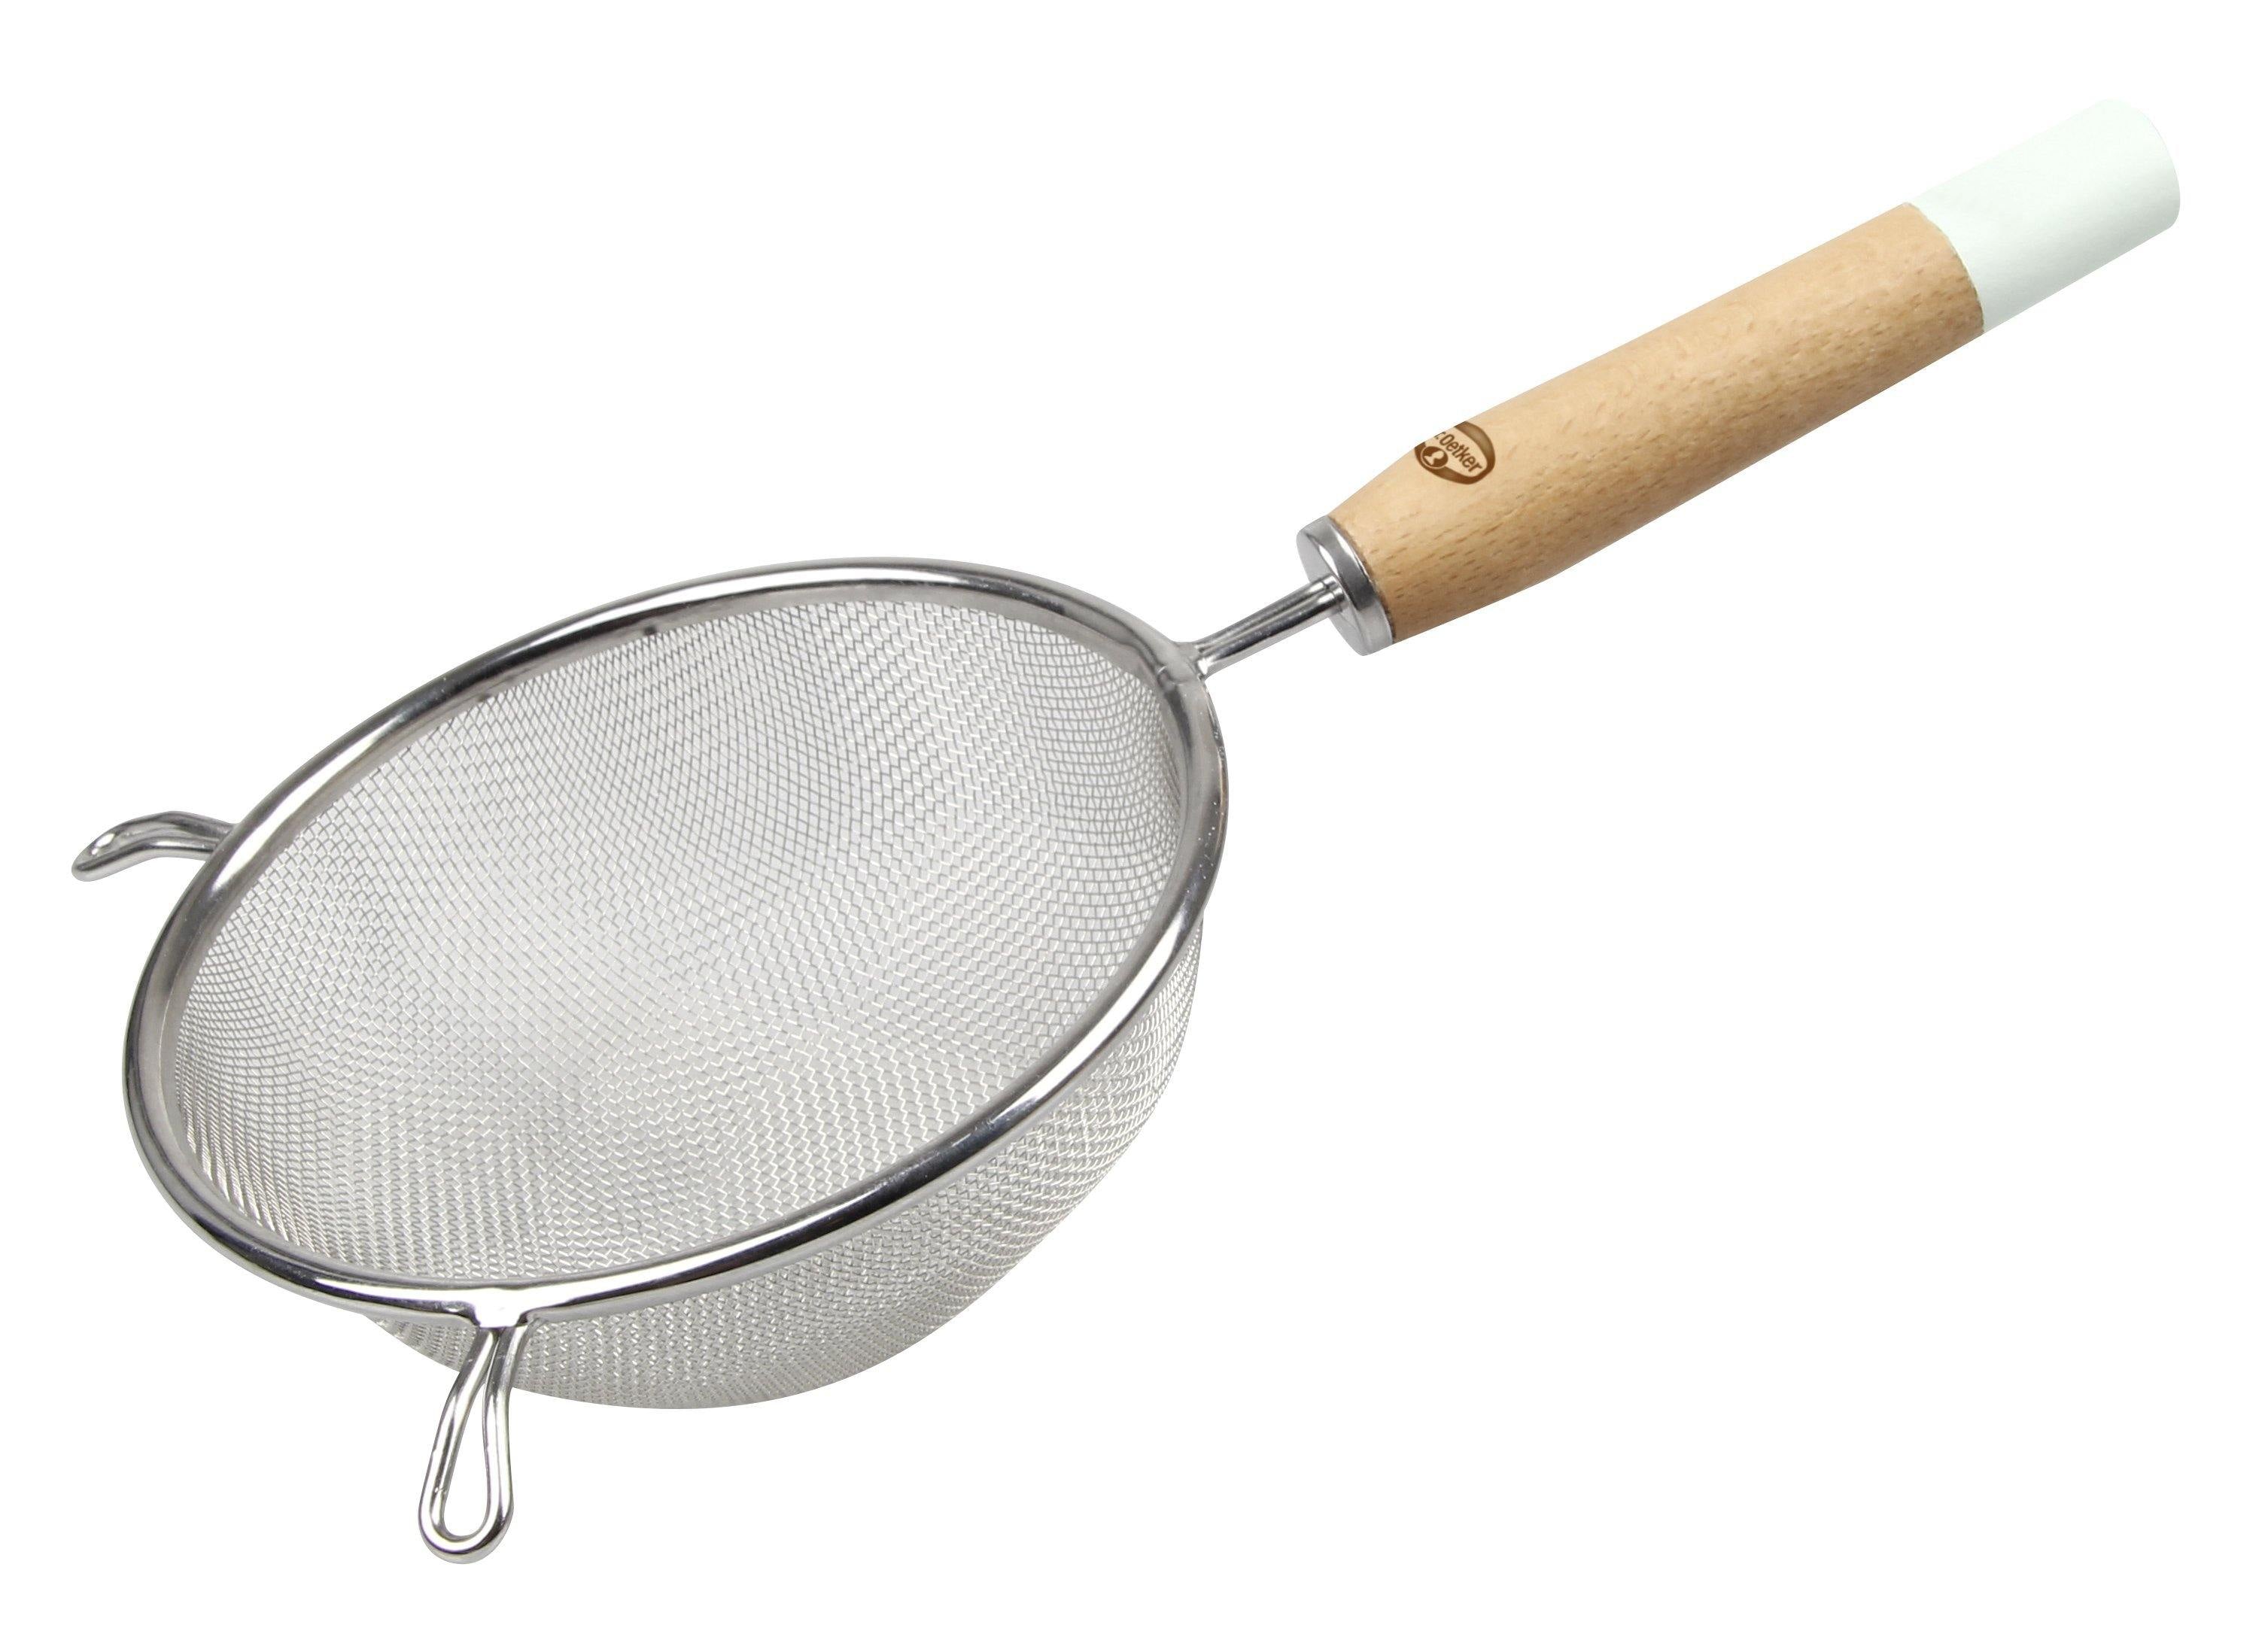 Dr. Oetker "Retro" Sieve With Wooden Handle, Light Green/Brown/Silver, 14X28 Cm - Whole and All